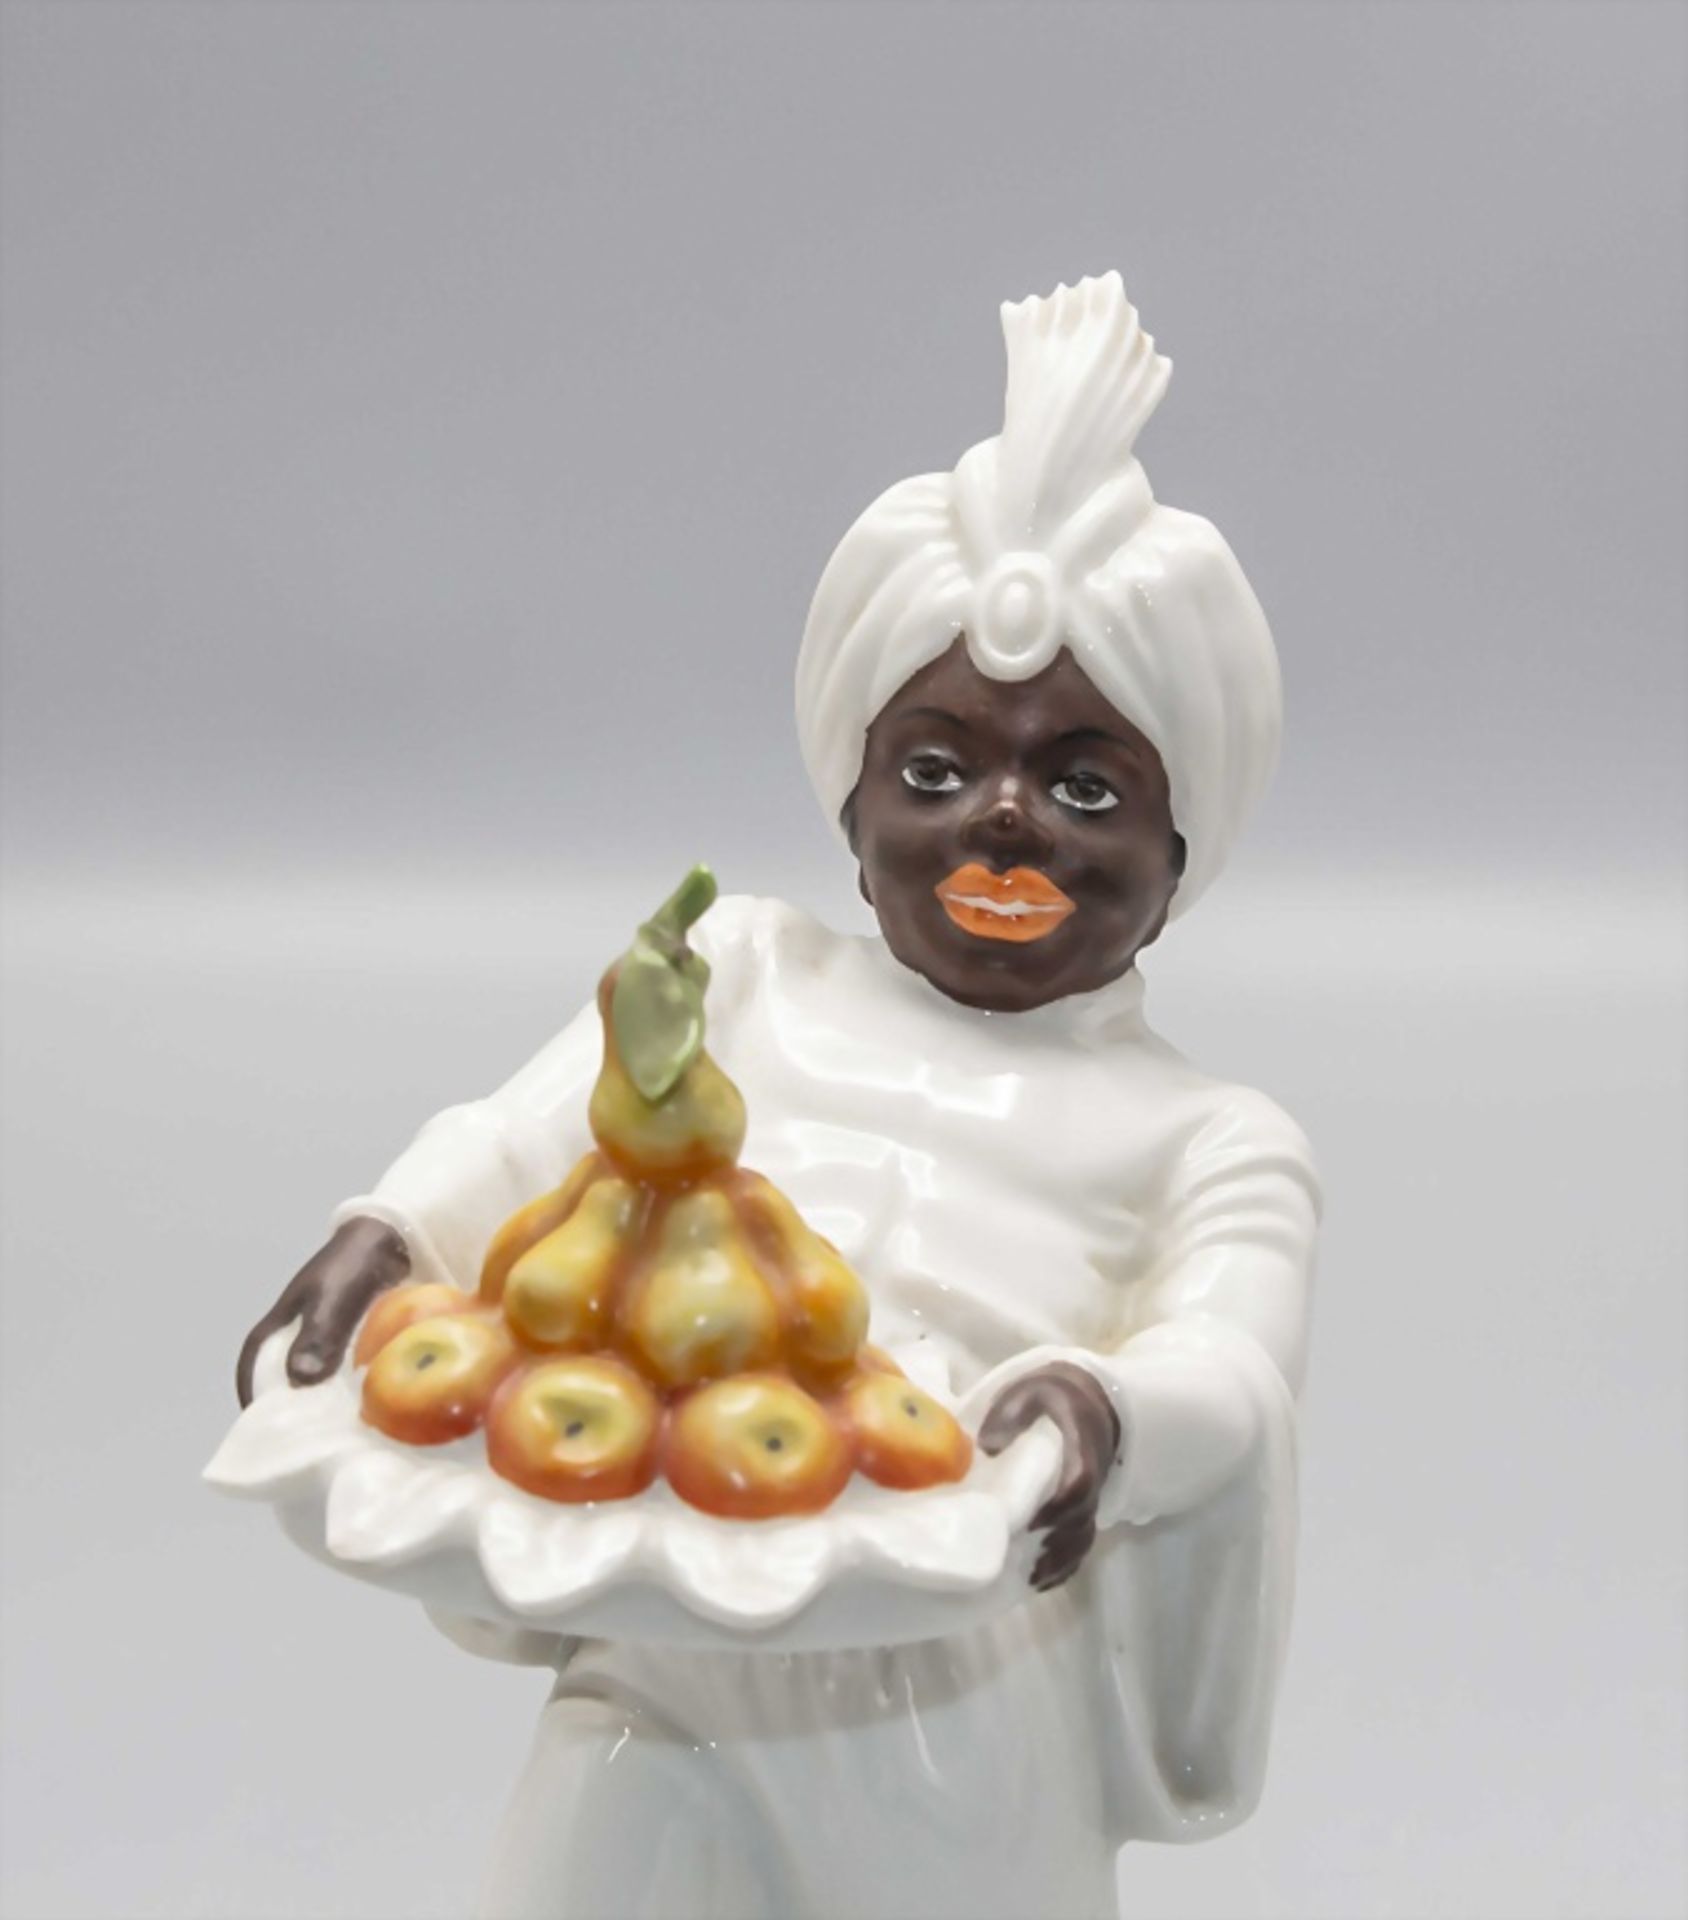 Mohr mit Früchtetablett / A blackamoor with a tray of fruits, Rosenthal, 1950er Jahre - Image 4 of 5